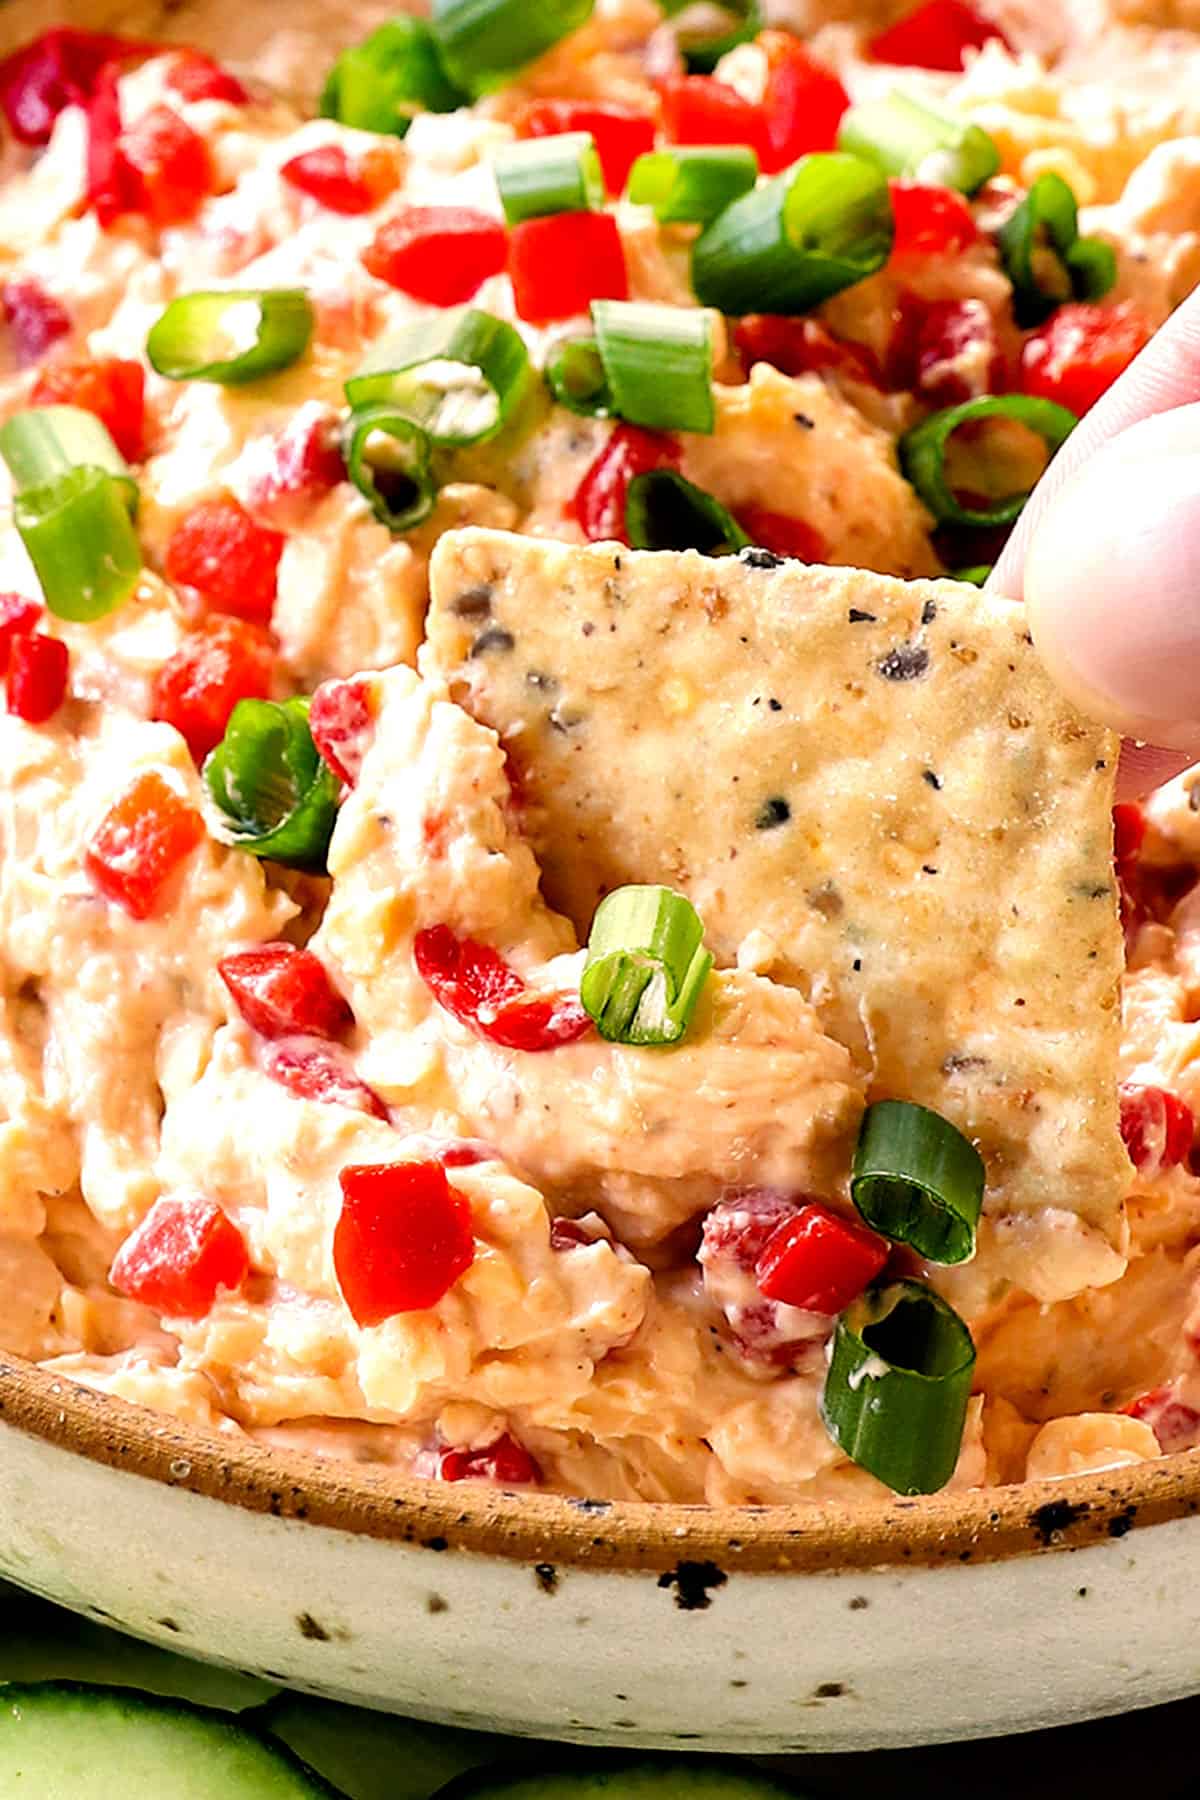 up close of dipping a cracker into pimento cheese recipe showing how rich and creamy it is